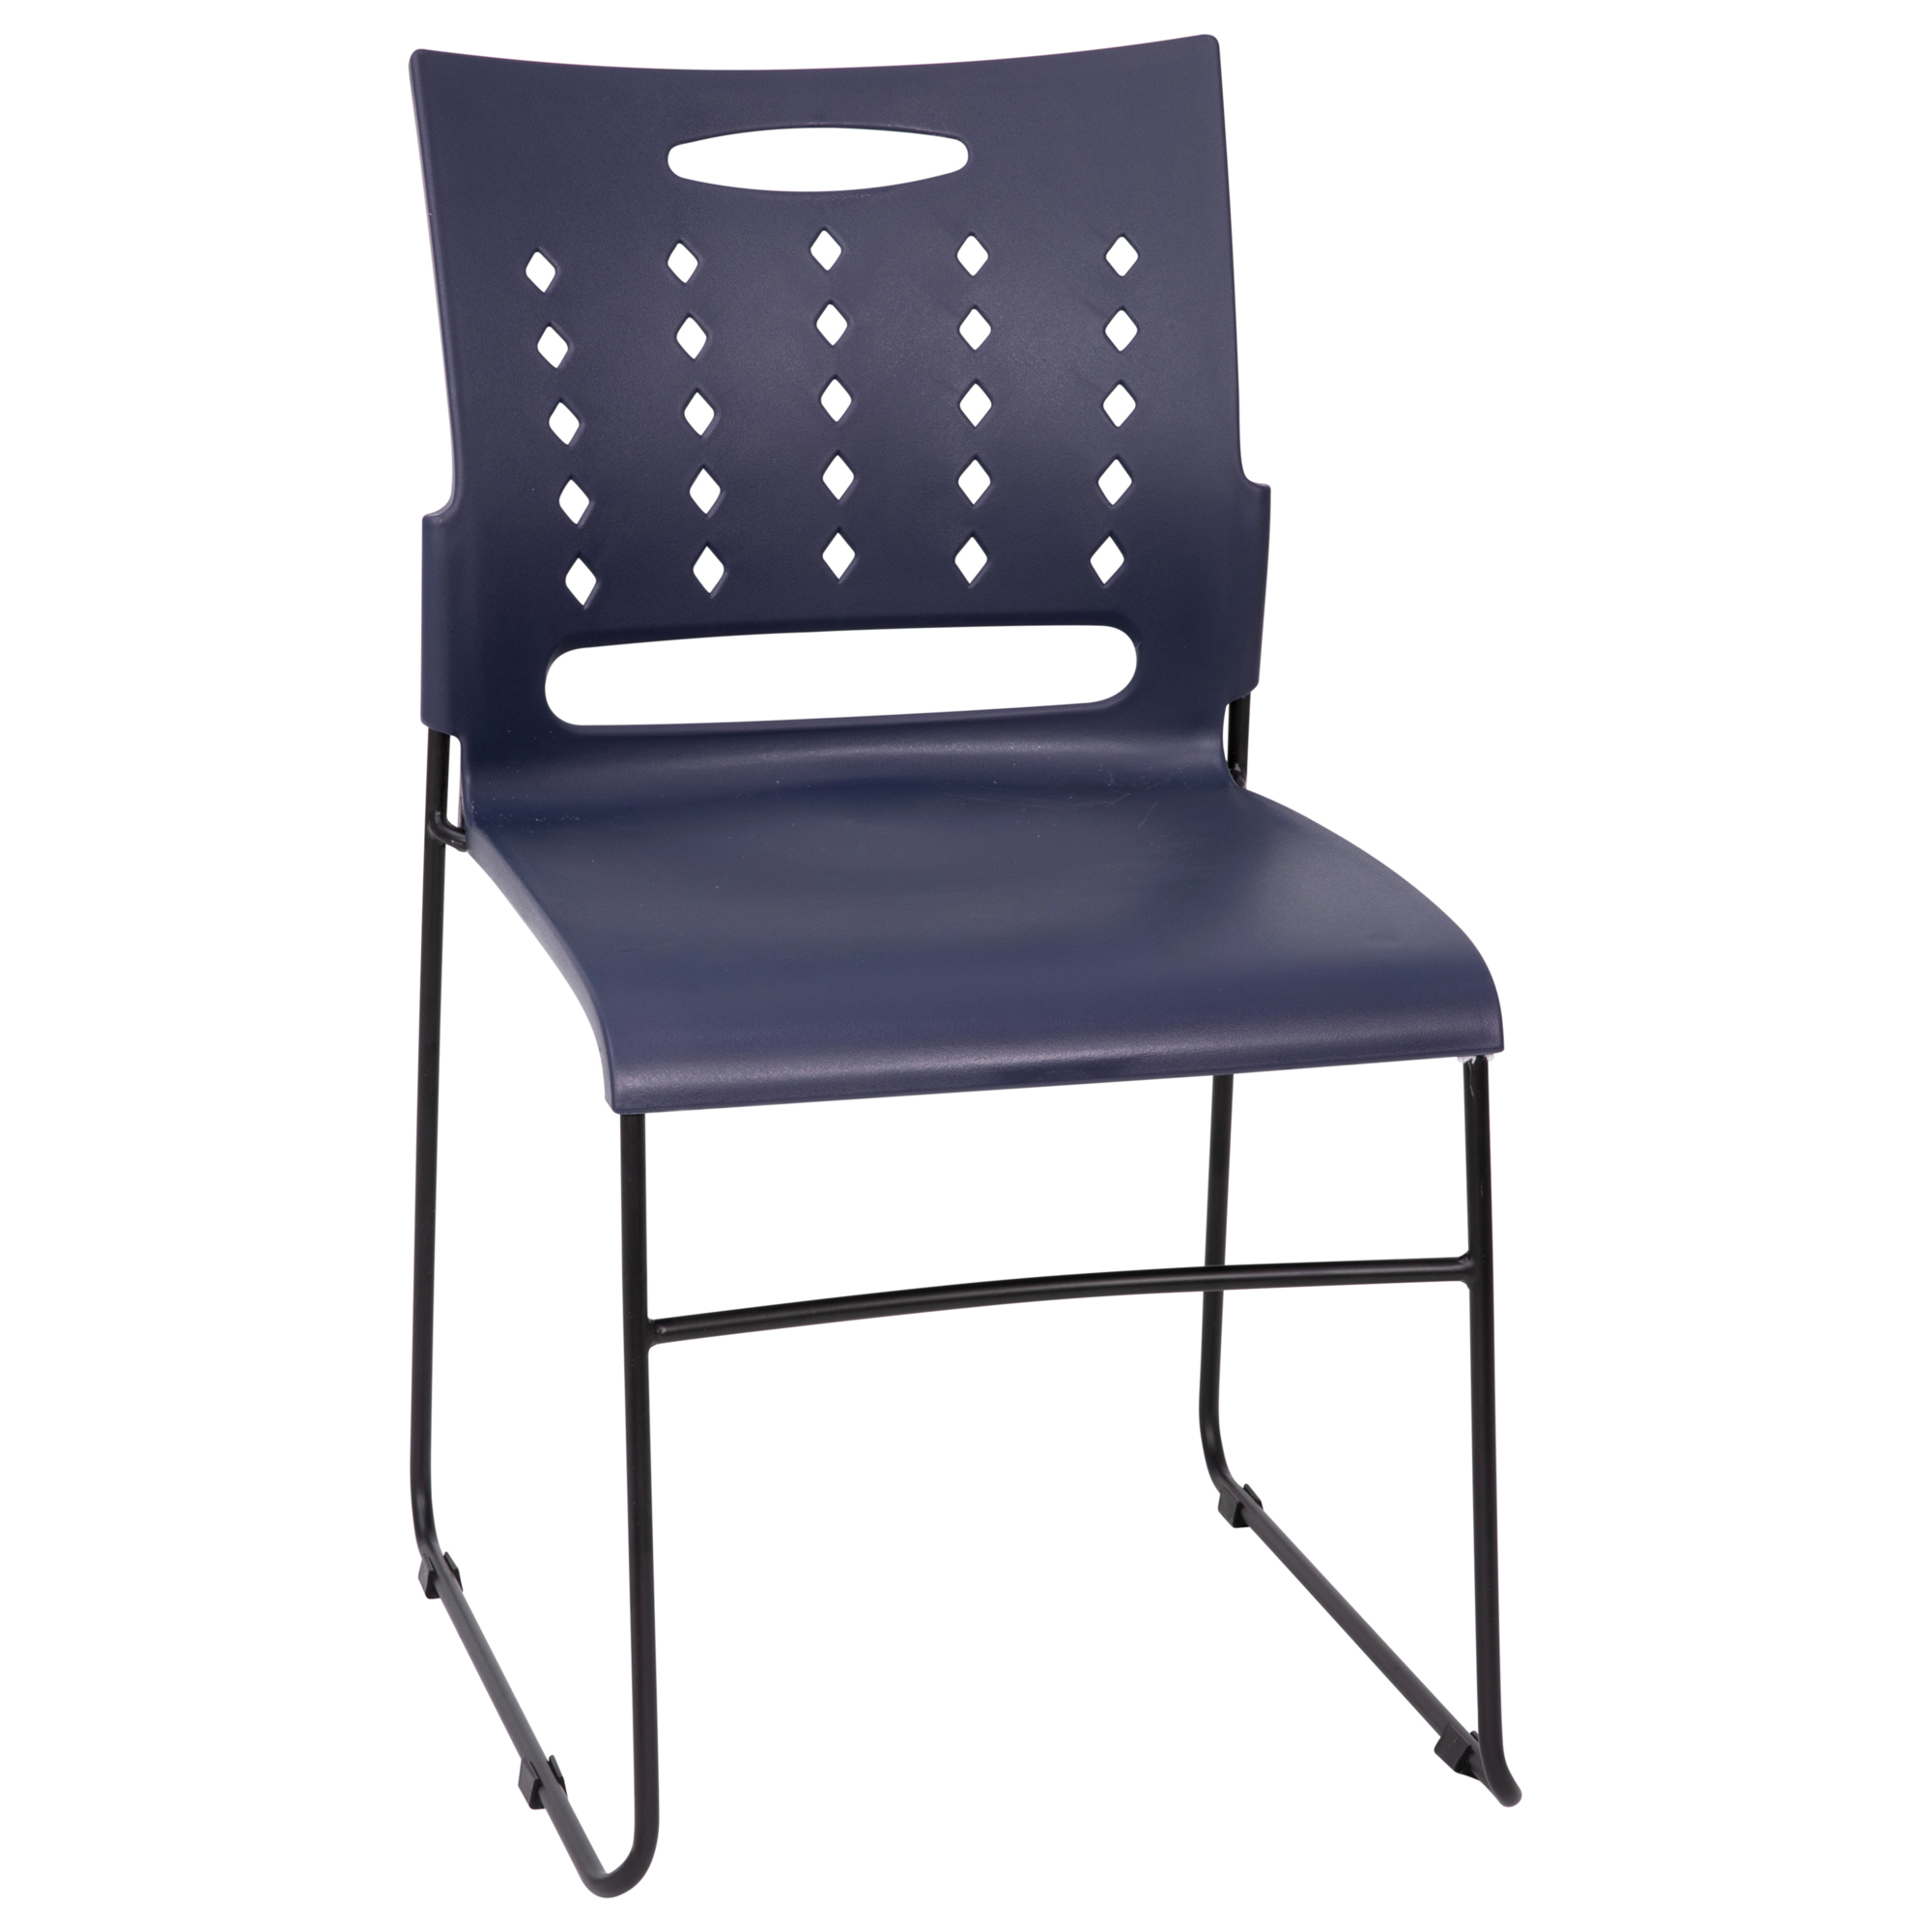 Flash Furniture, 881 lb. Capacity Navy Sled Base Stack Chair, Primary Color Blue, Included (qty.) 1, Model RUT2NVYBK